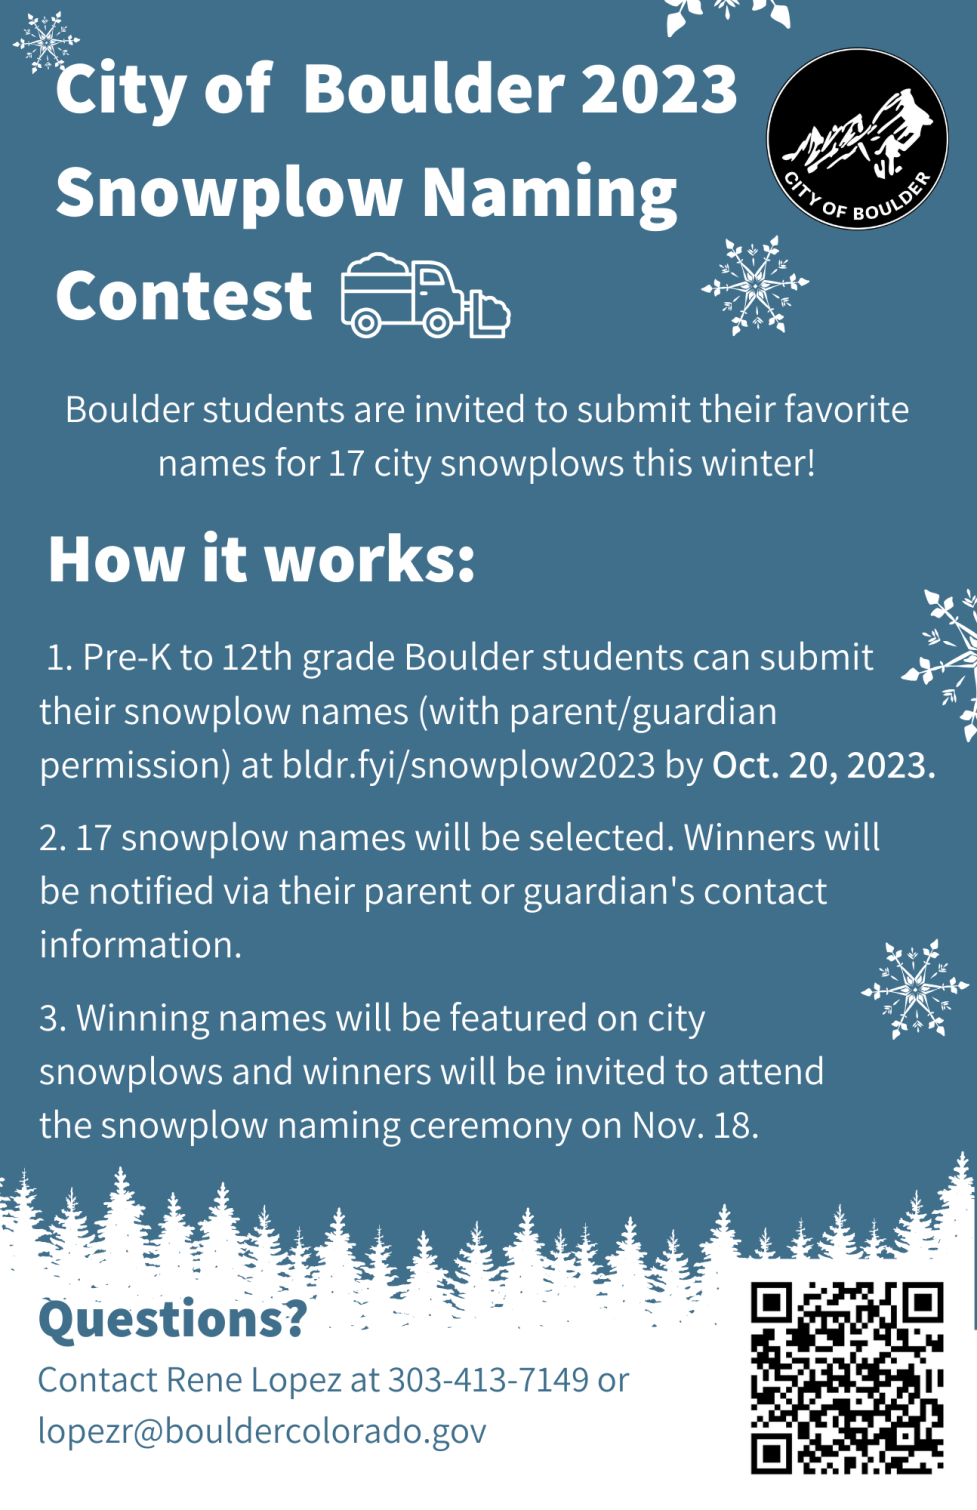 Snowplow Naming Contest Side 2 2023